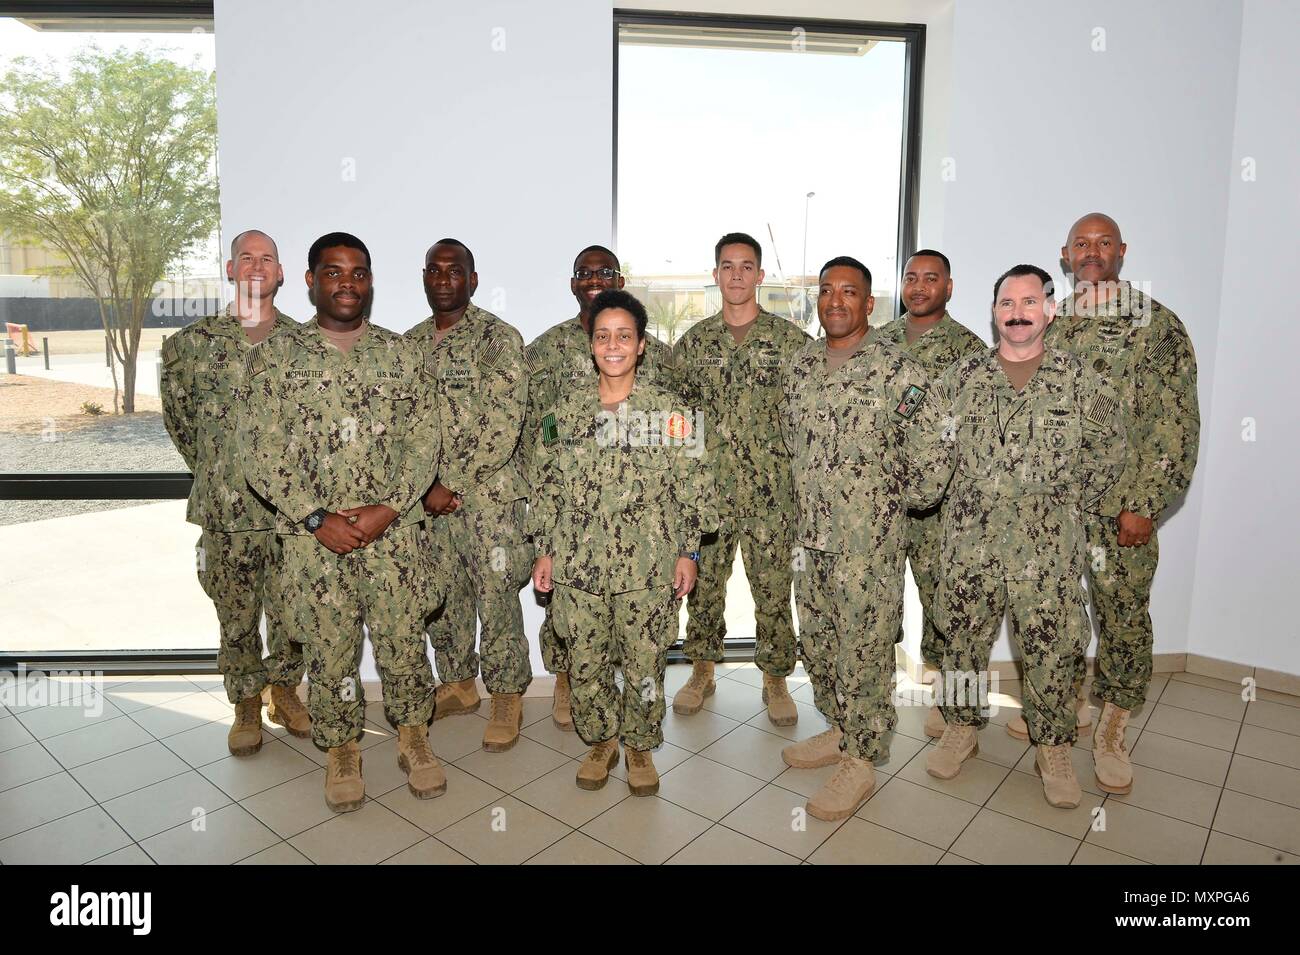 161121-N-HX127-128 161121-N-XO780-127 CAMP LEMONNIER (Nov. 21, 2016) Commander, U.S. Naval Forces Europe-Africa /Commander, Allied Joint Force Command Naples, Adm. Michelle Howard, center, and U.S. Naval Forces Europe-Africa Fleet Master Chief Raymond D. Kemp Sr., right rear, meet with Sailor of the Year winners from Coastal Riverine Squadron 11 and Combined Joint Task Force, Horn of Africa Nov. 21, 2016. U.S. Naval Forces Europe-Africa, headquartered in Naples, Italy, oversees joint and naval operations, often in concert with allied, joint, and interagency partners, to enable enduring relatio Stock Photo